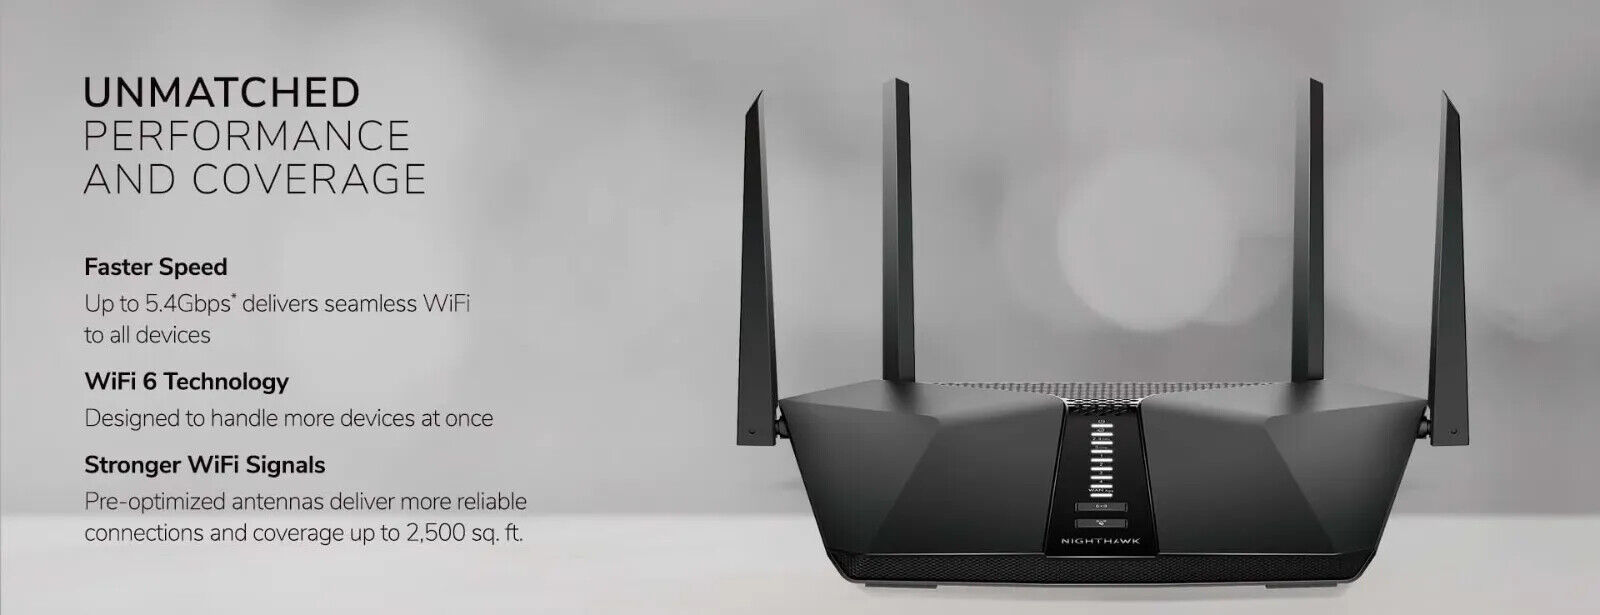 Netgear Nighthawk AX5400 WiFi 6 Router with One year Advanced Cyber Security